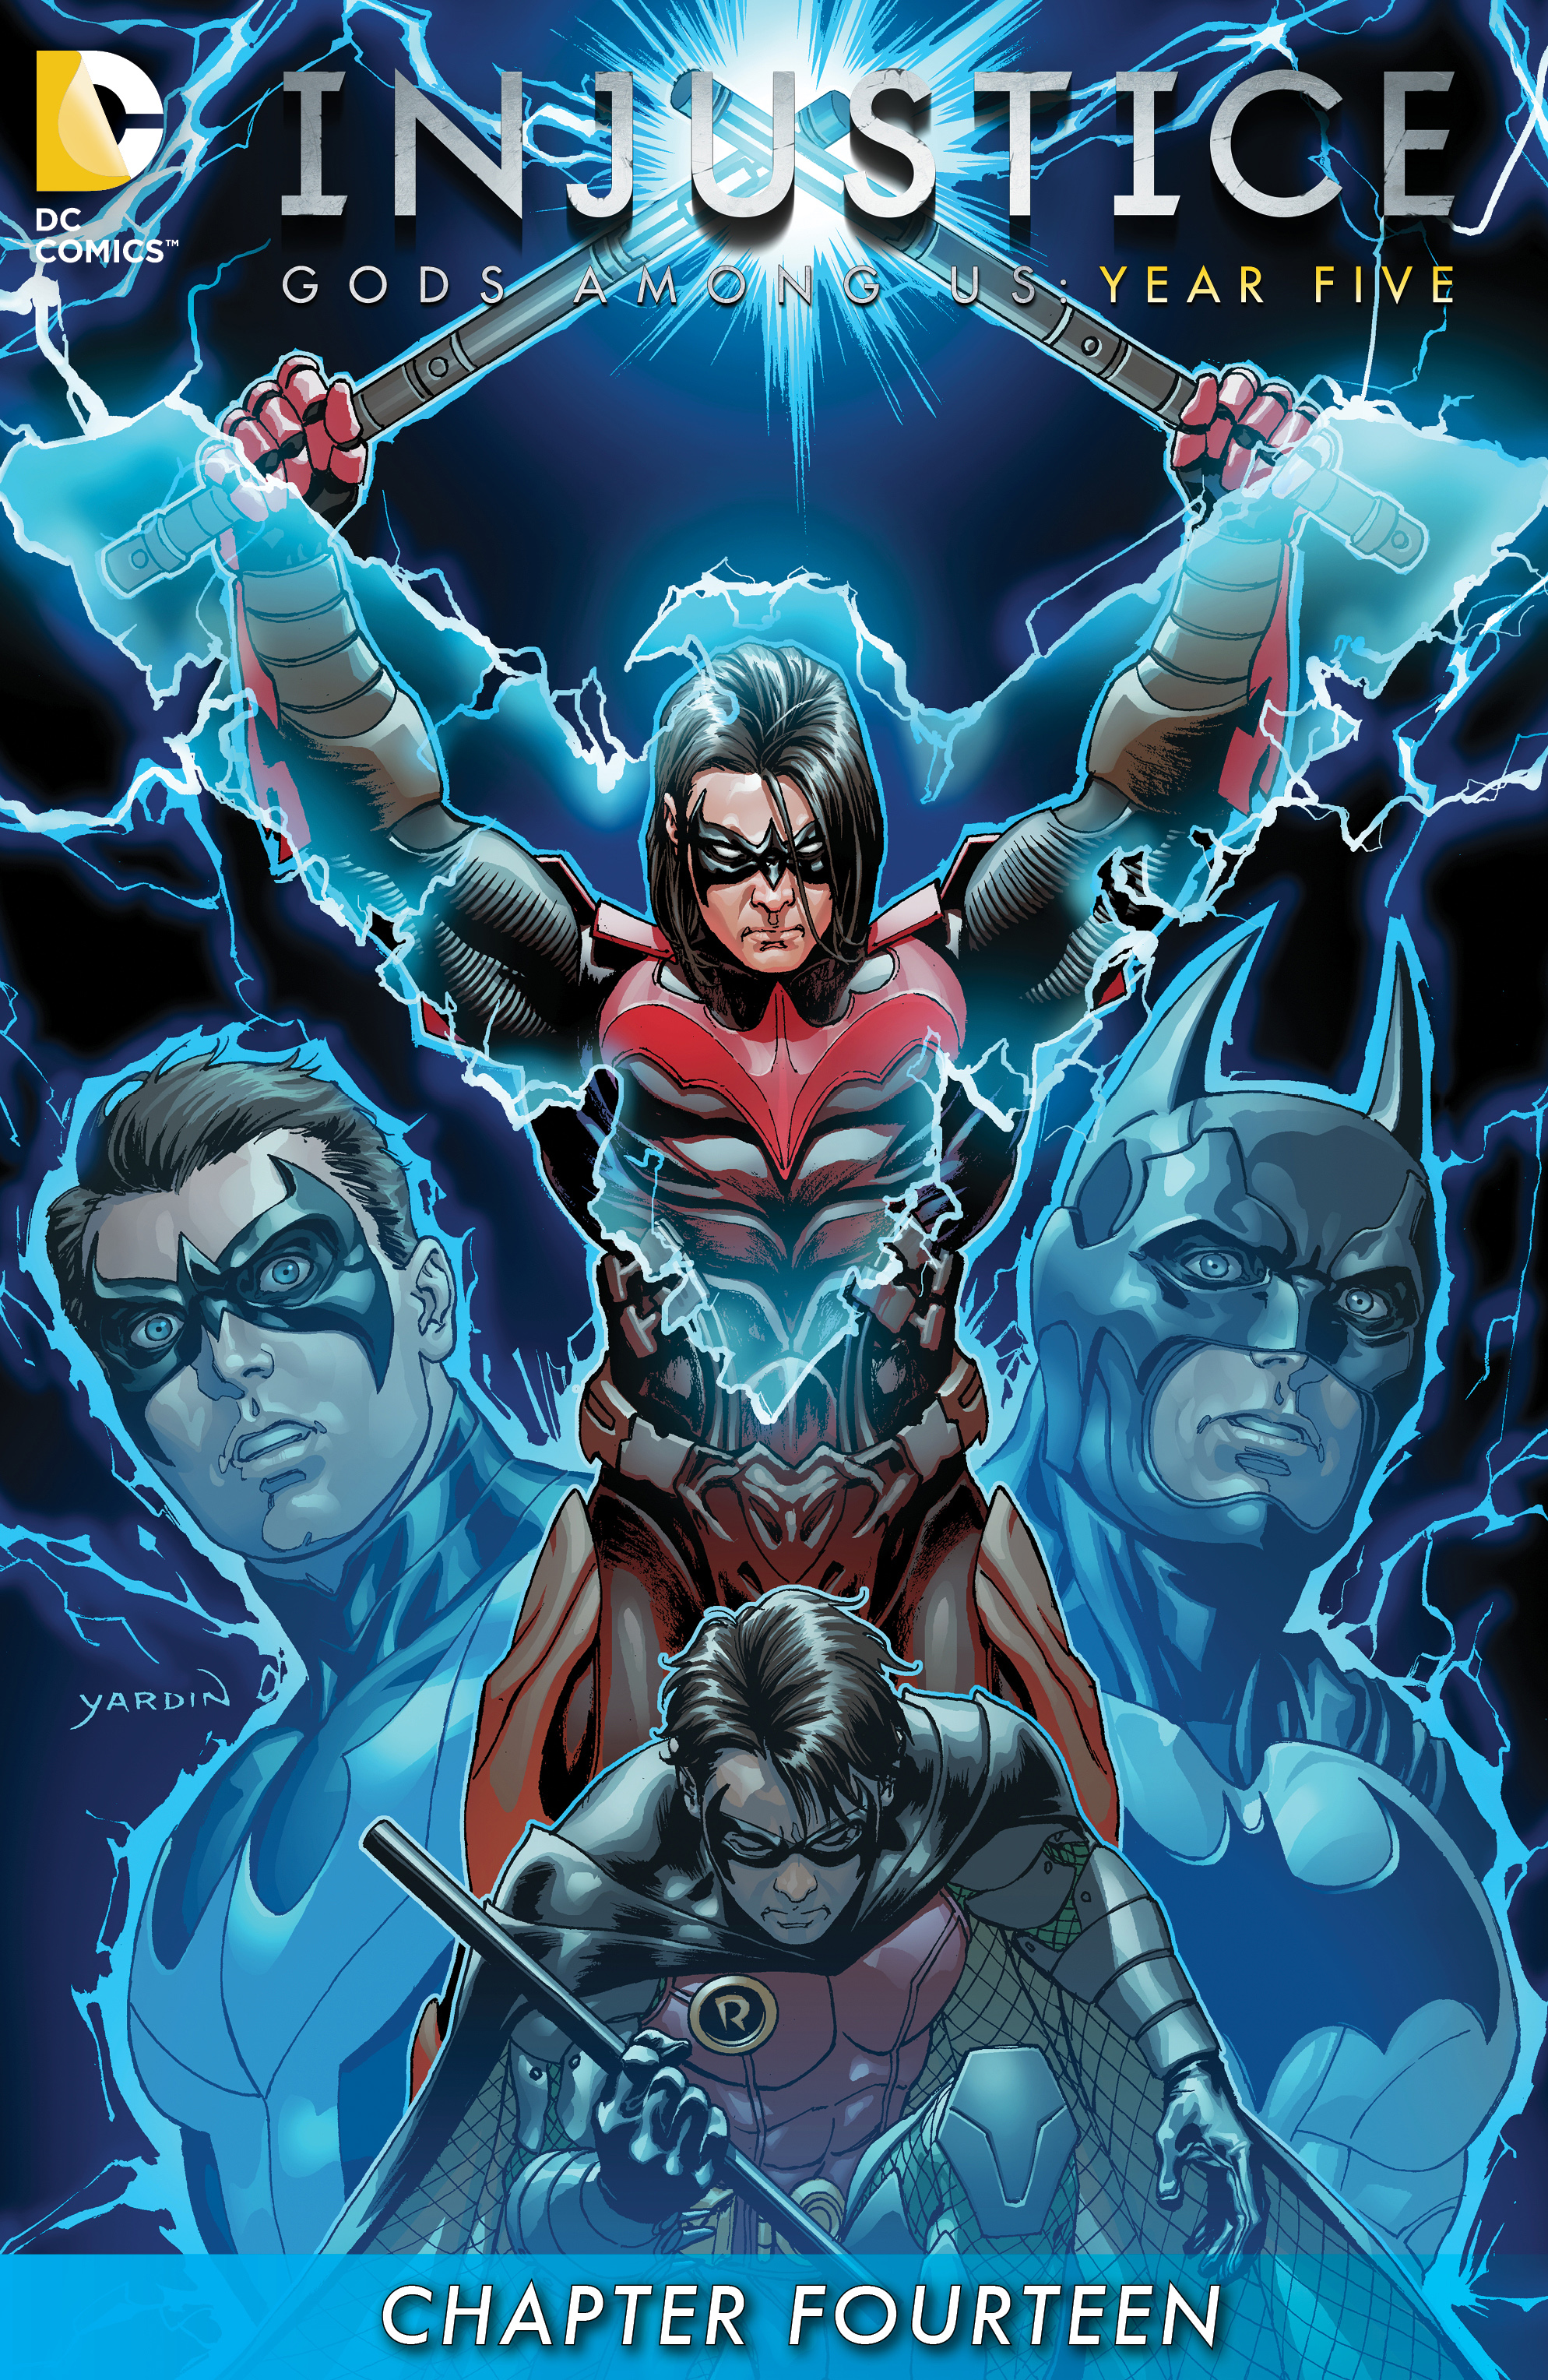 Read online Injustice: Gods Among Us: Year Five comic -  Issue #14 - 2